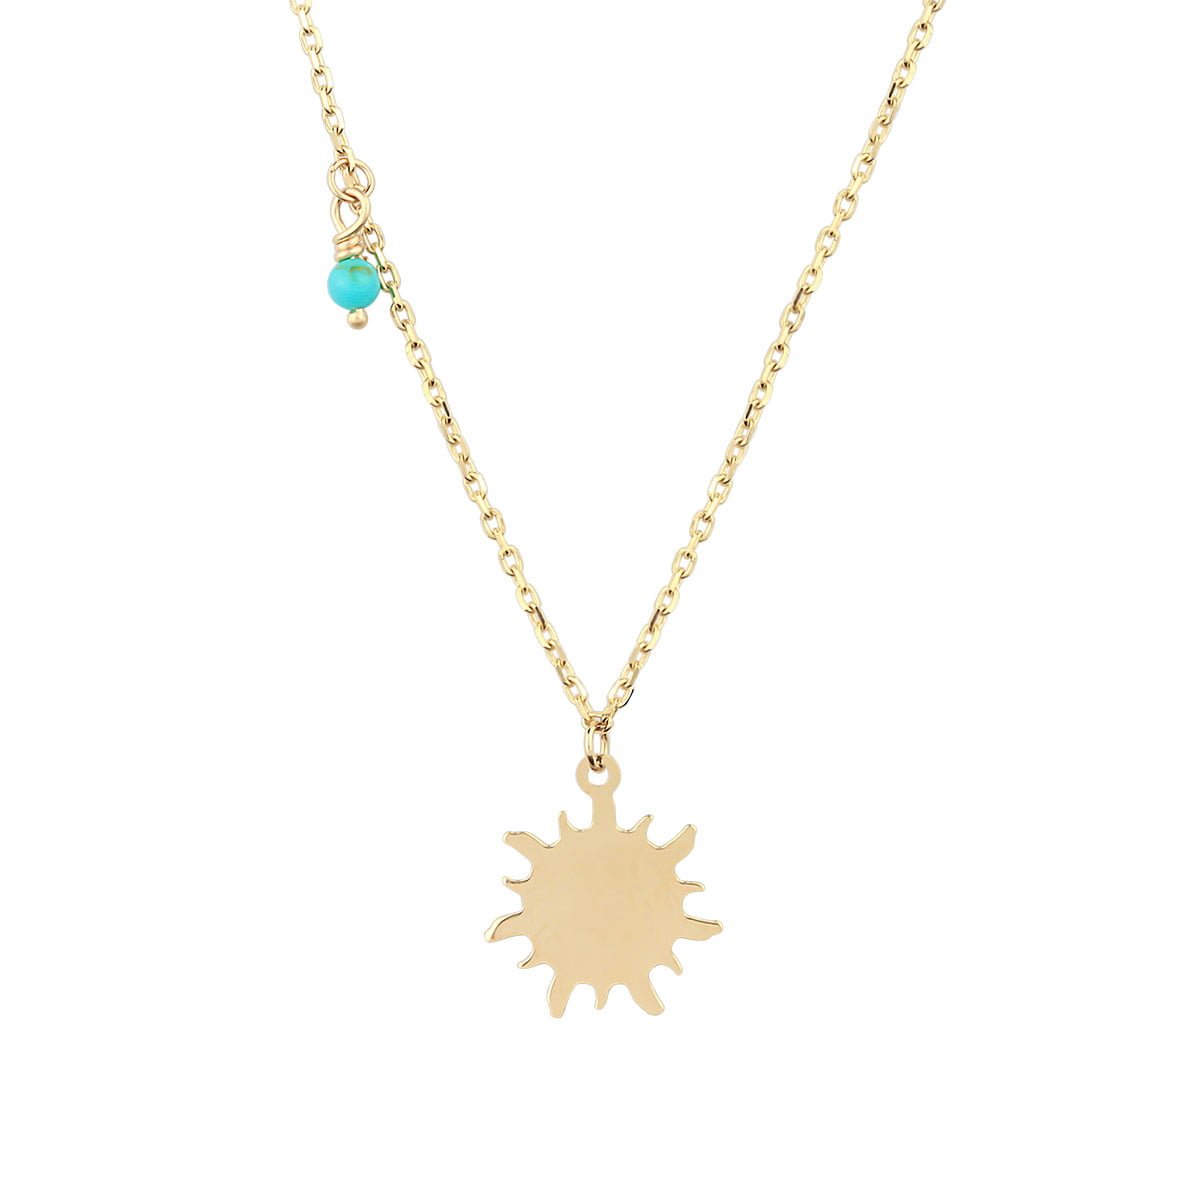 18ct Gold Turquoise Pendant Necklace